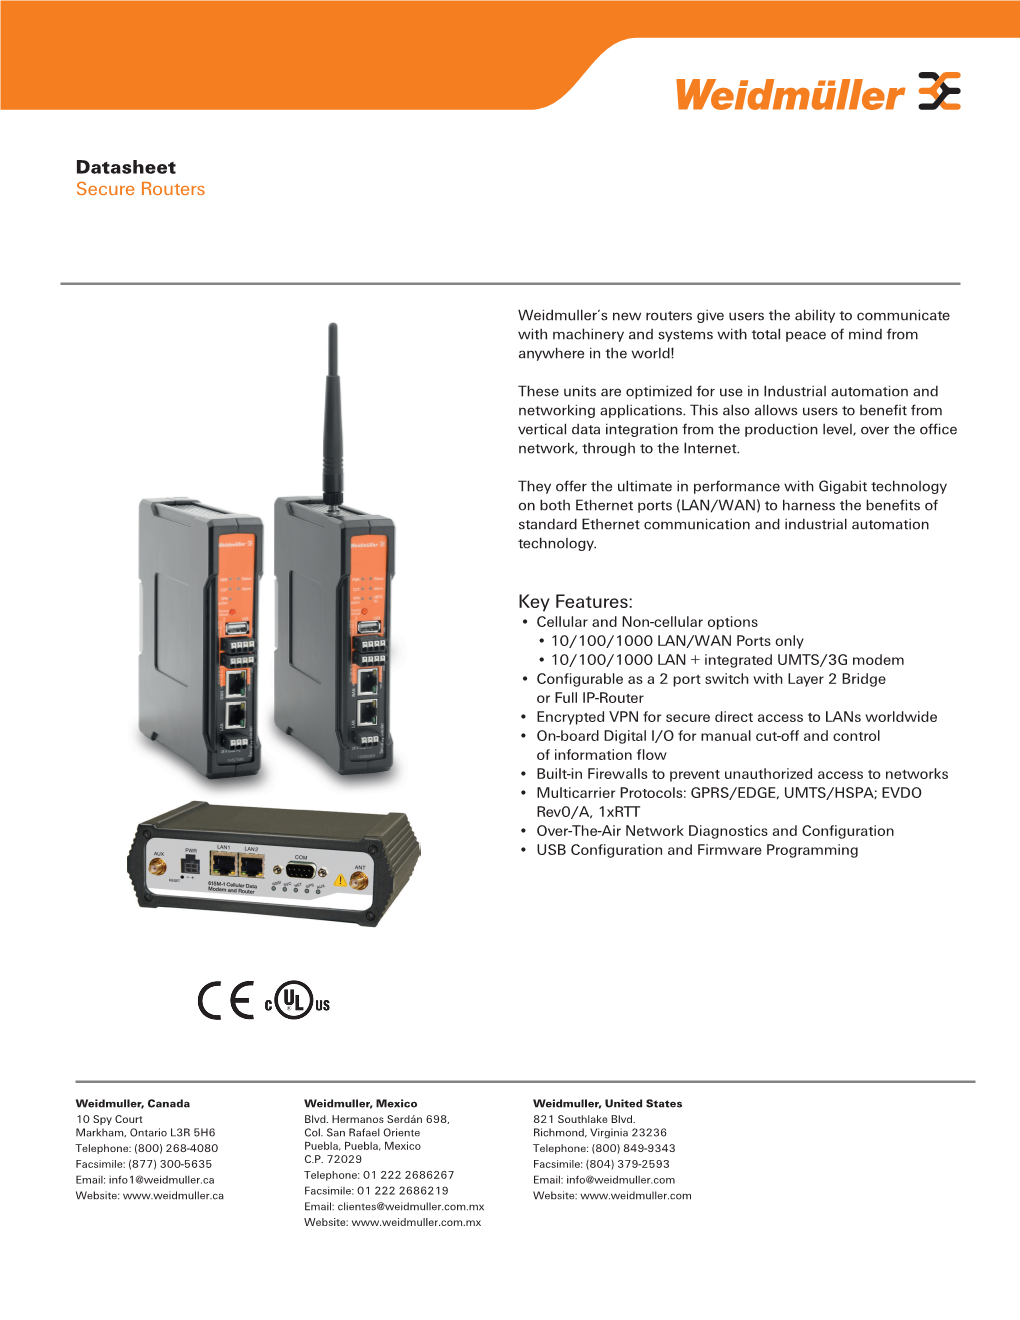 Datasheet Secure Routers Key Features